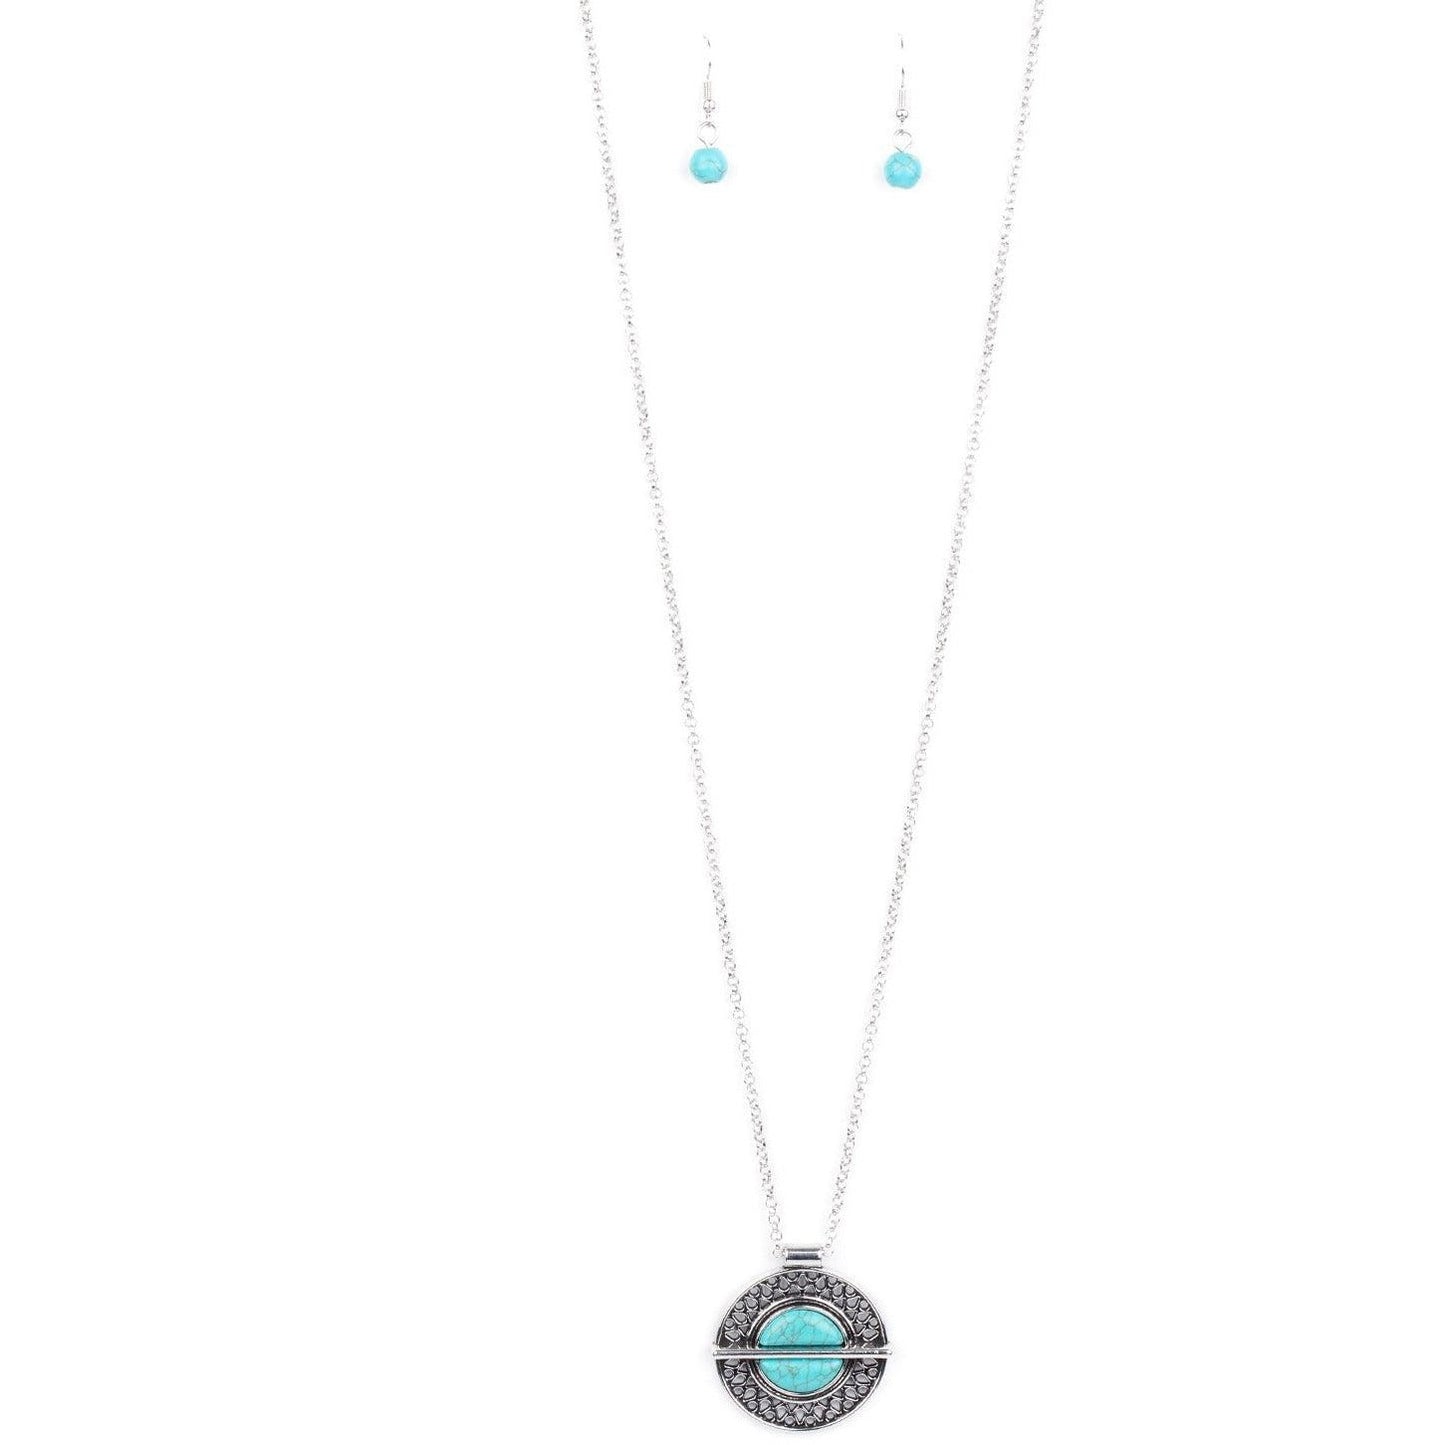 Adobe Adornment - Blue Turquoise Necklace - rainbowartsreview by Danielle Baker